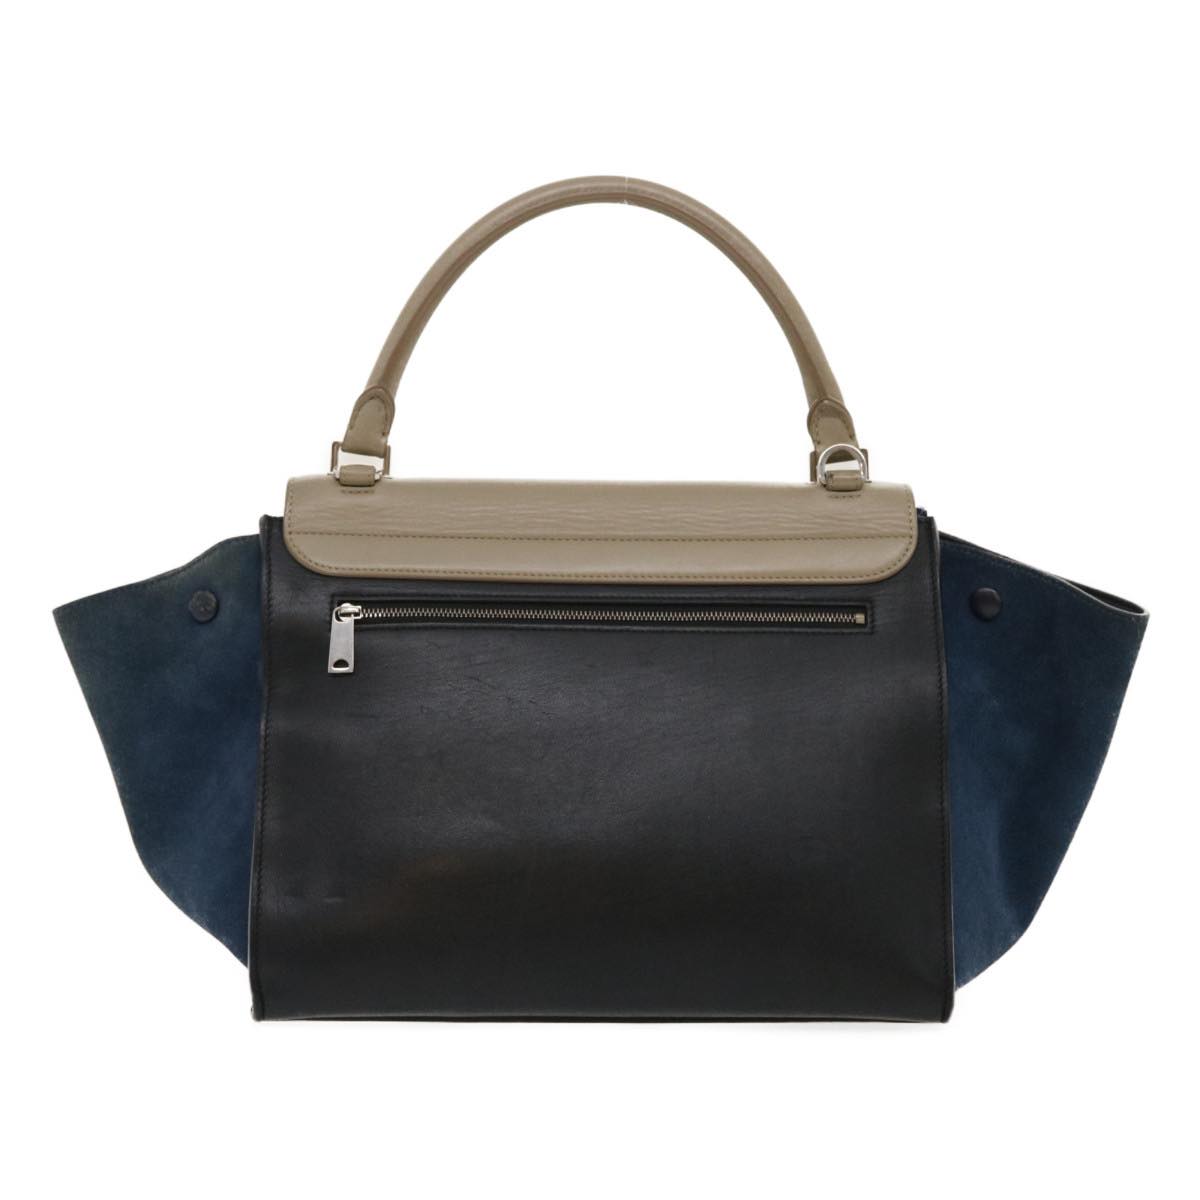 CELINE Hand Bag Leather Suede Gray Navy Auth am2375g